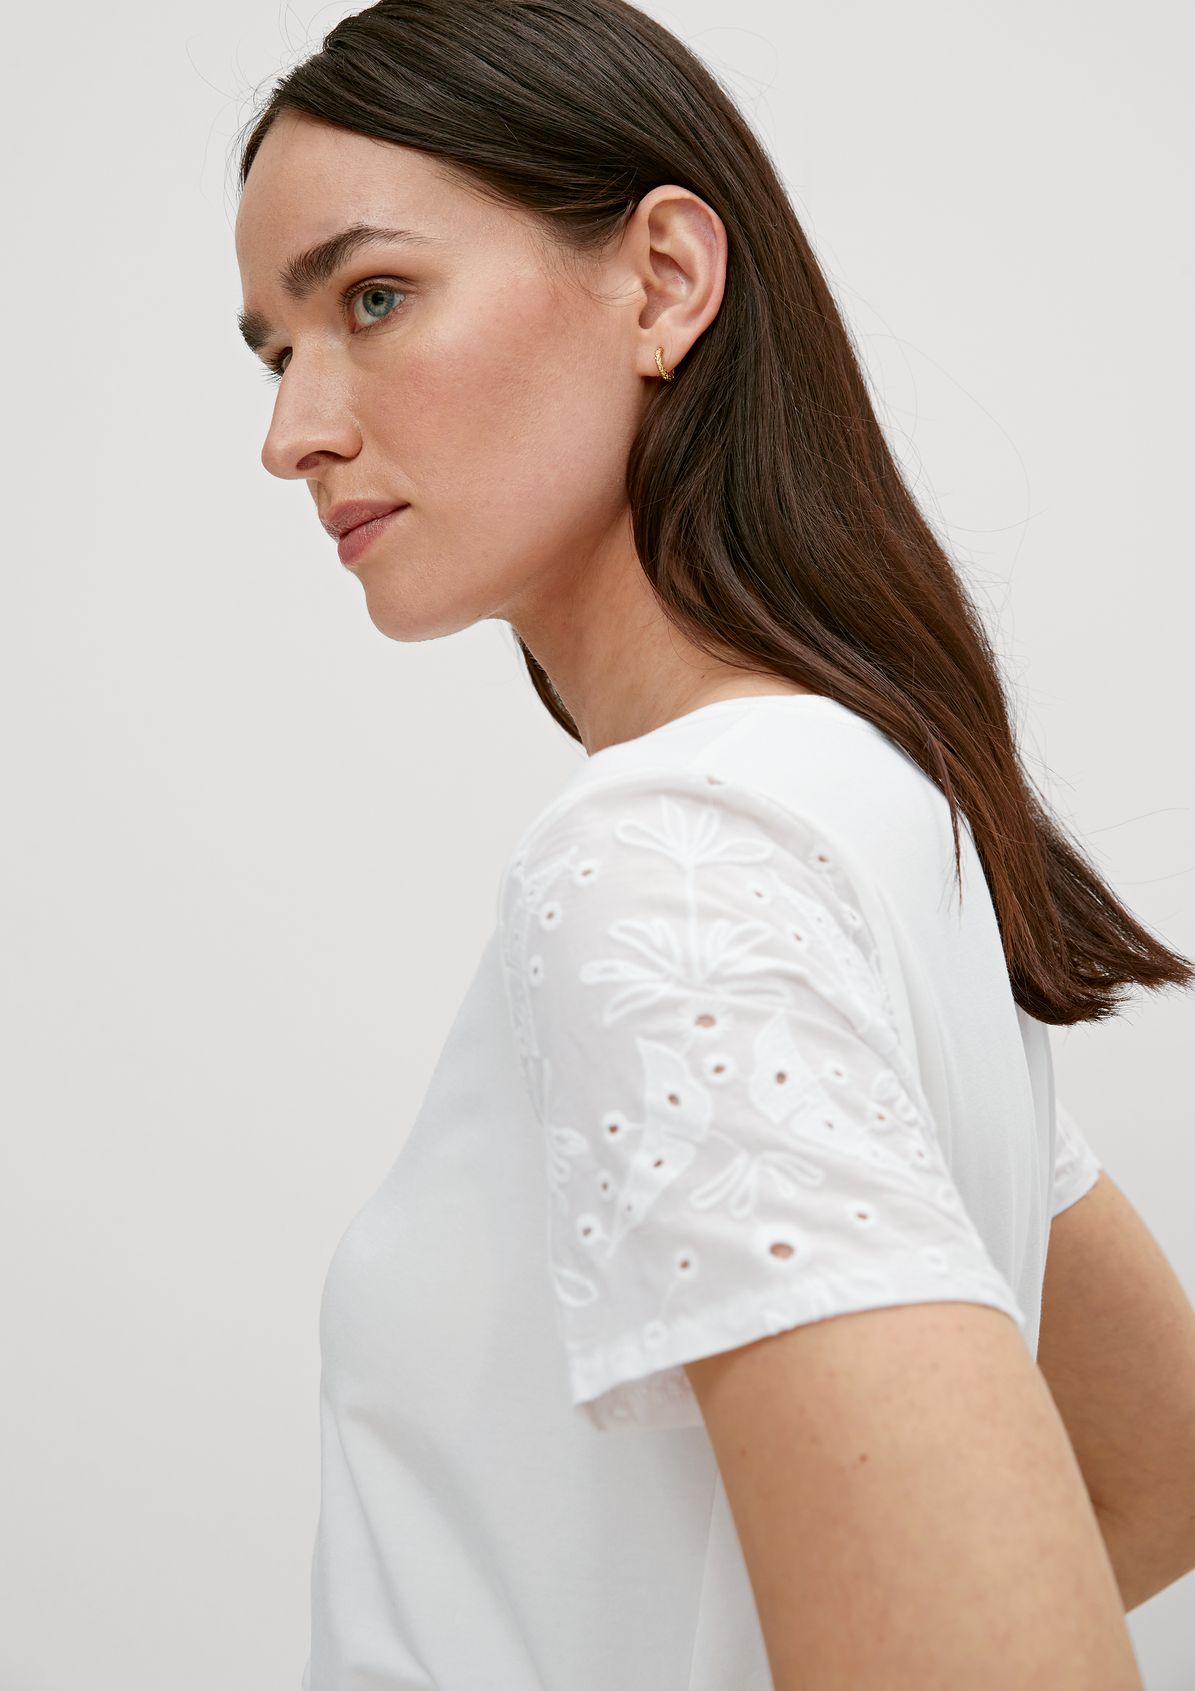 Jersey top with lace details from comma